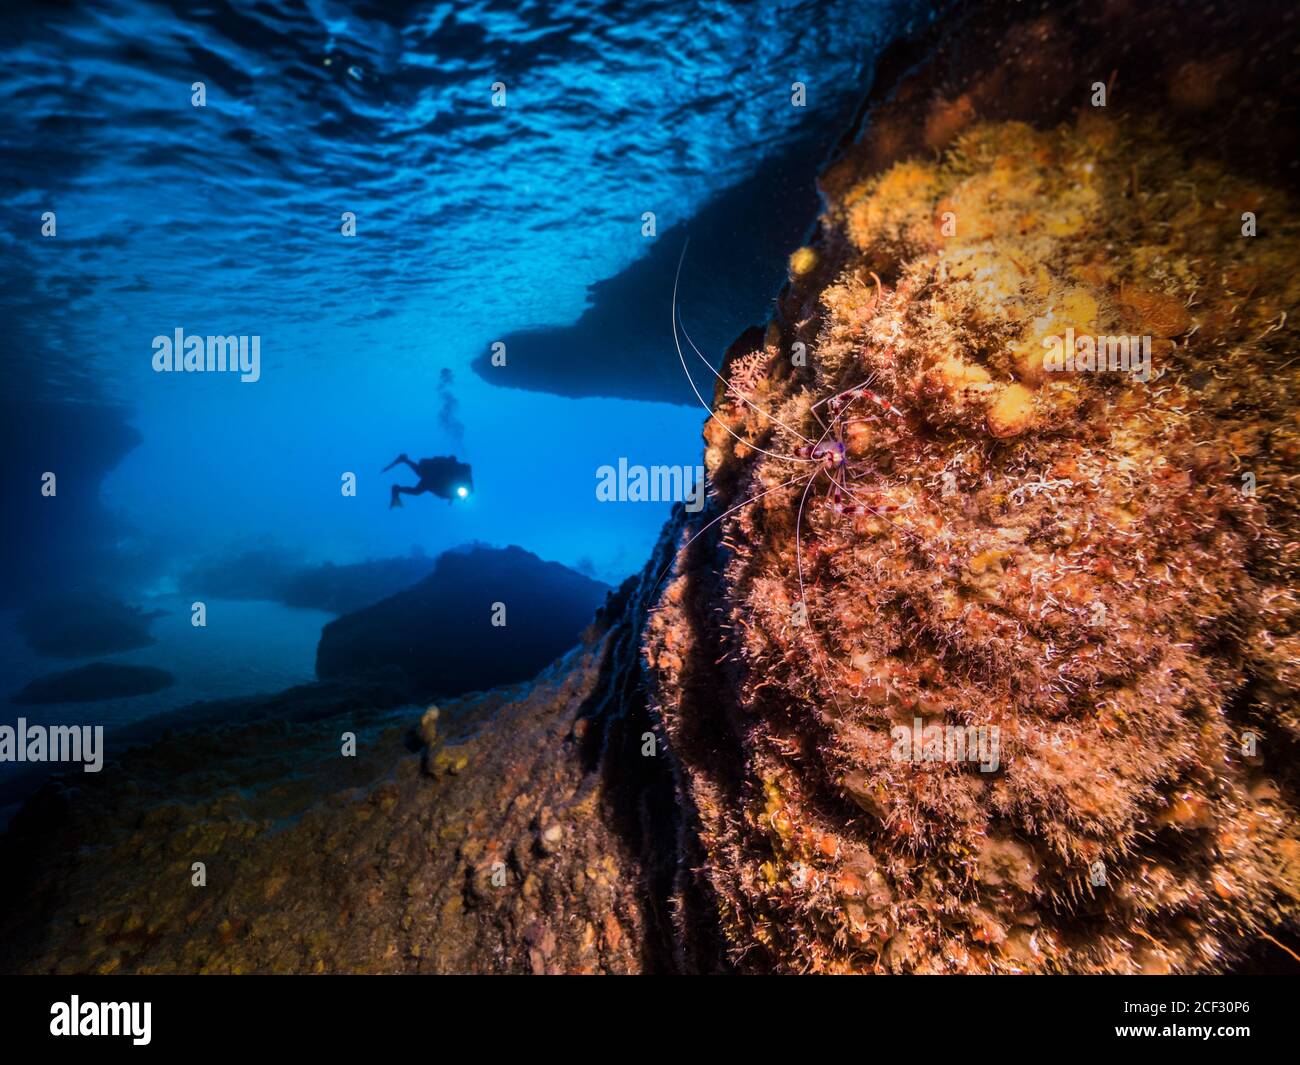 Seascape of coral reef in the Caribbean Sea / Curacao with Diver and Banded Coral Shrimp in cave 'Blue Room' Stock Photo